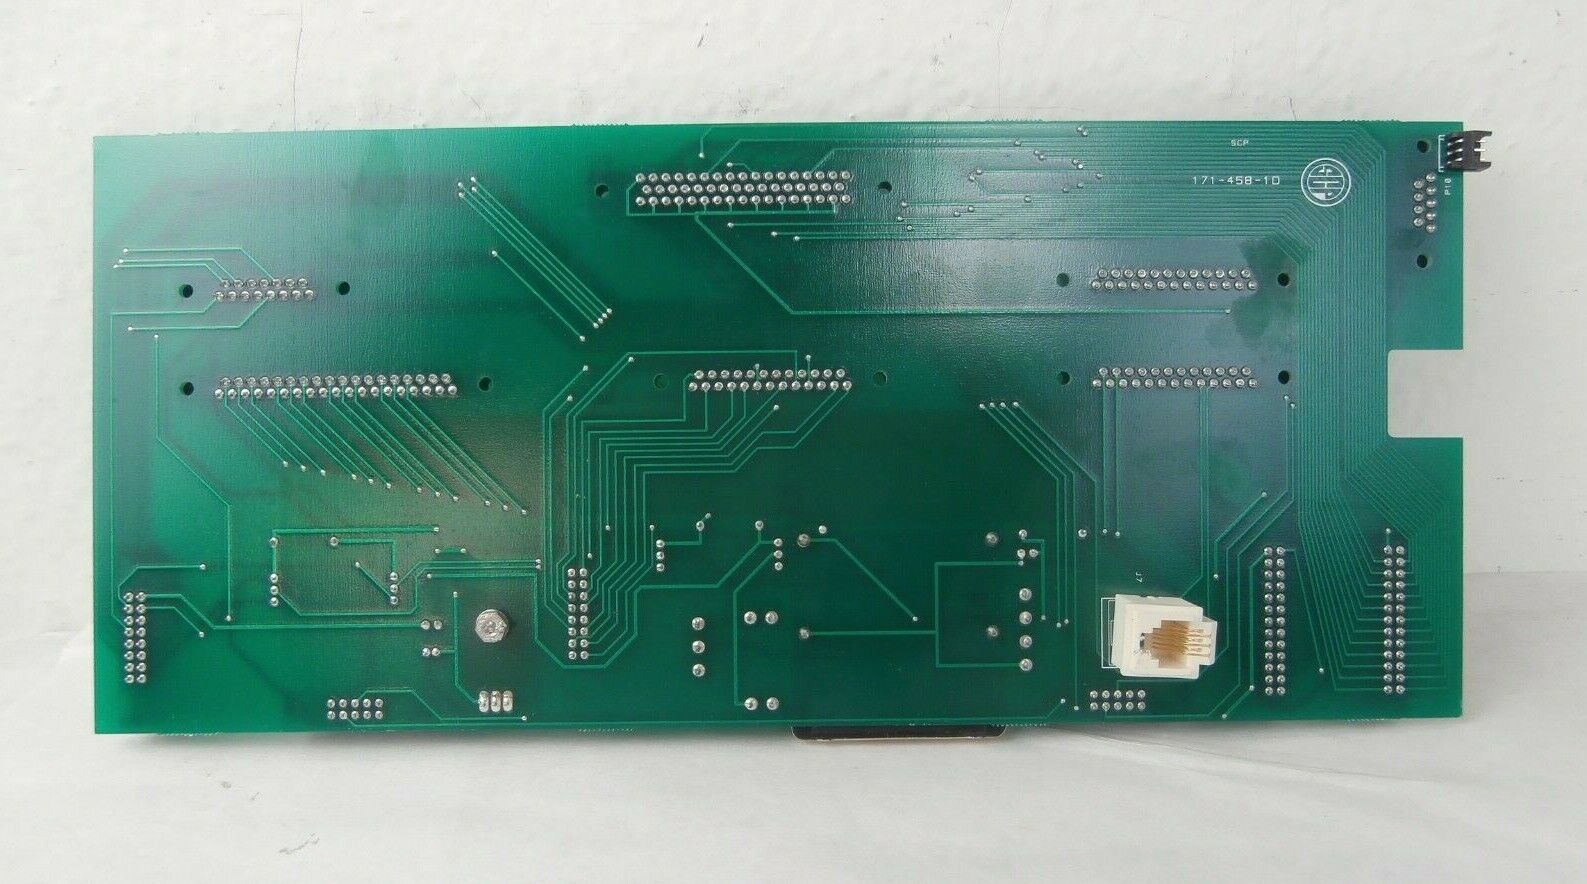 SCP Global Technologies 746-054-1B Robot Mother BAM Board PCB 171-458-1D Working